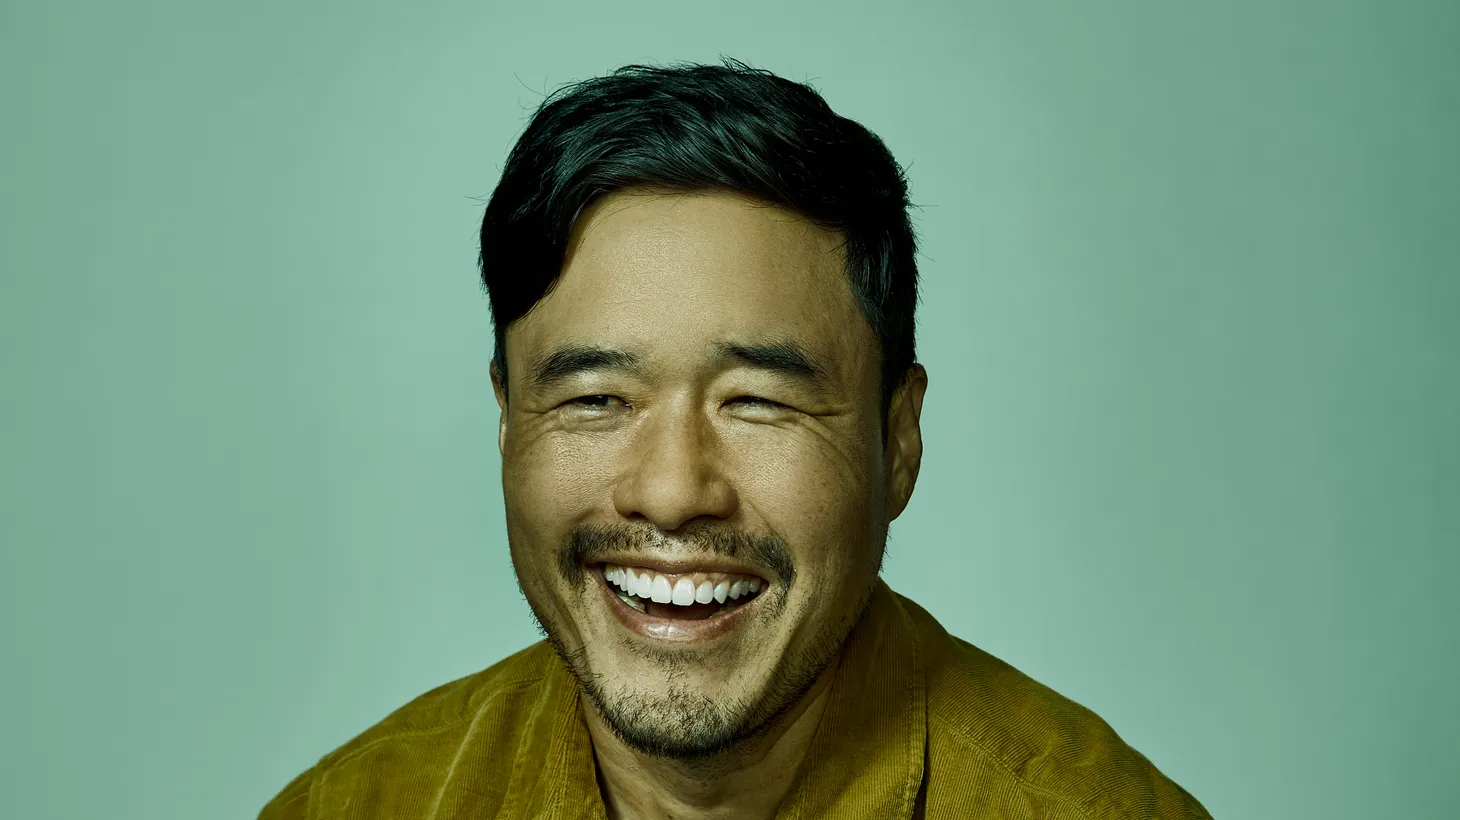 “[The Unseen hip-hop album by Quasimoto] is just one of those weird, very specific oddities that for some reason... just spoke to me so deeply,” says actor-director Randall Park.